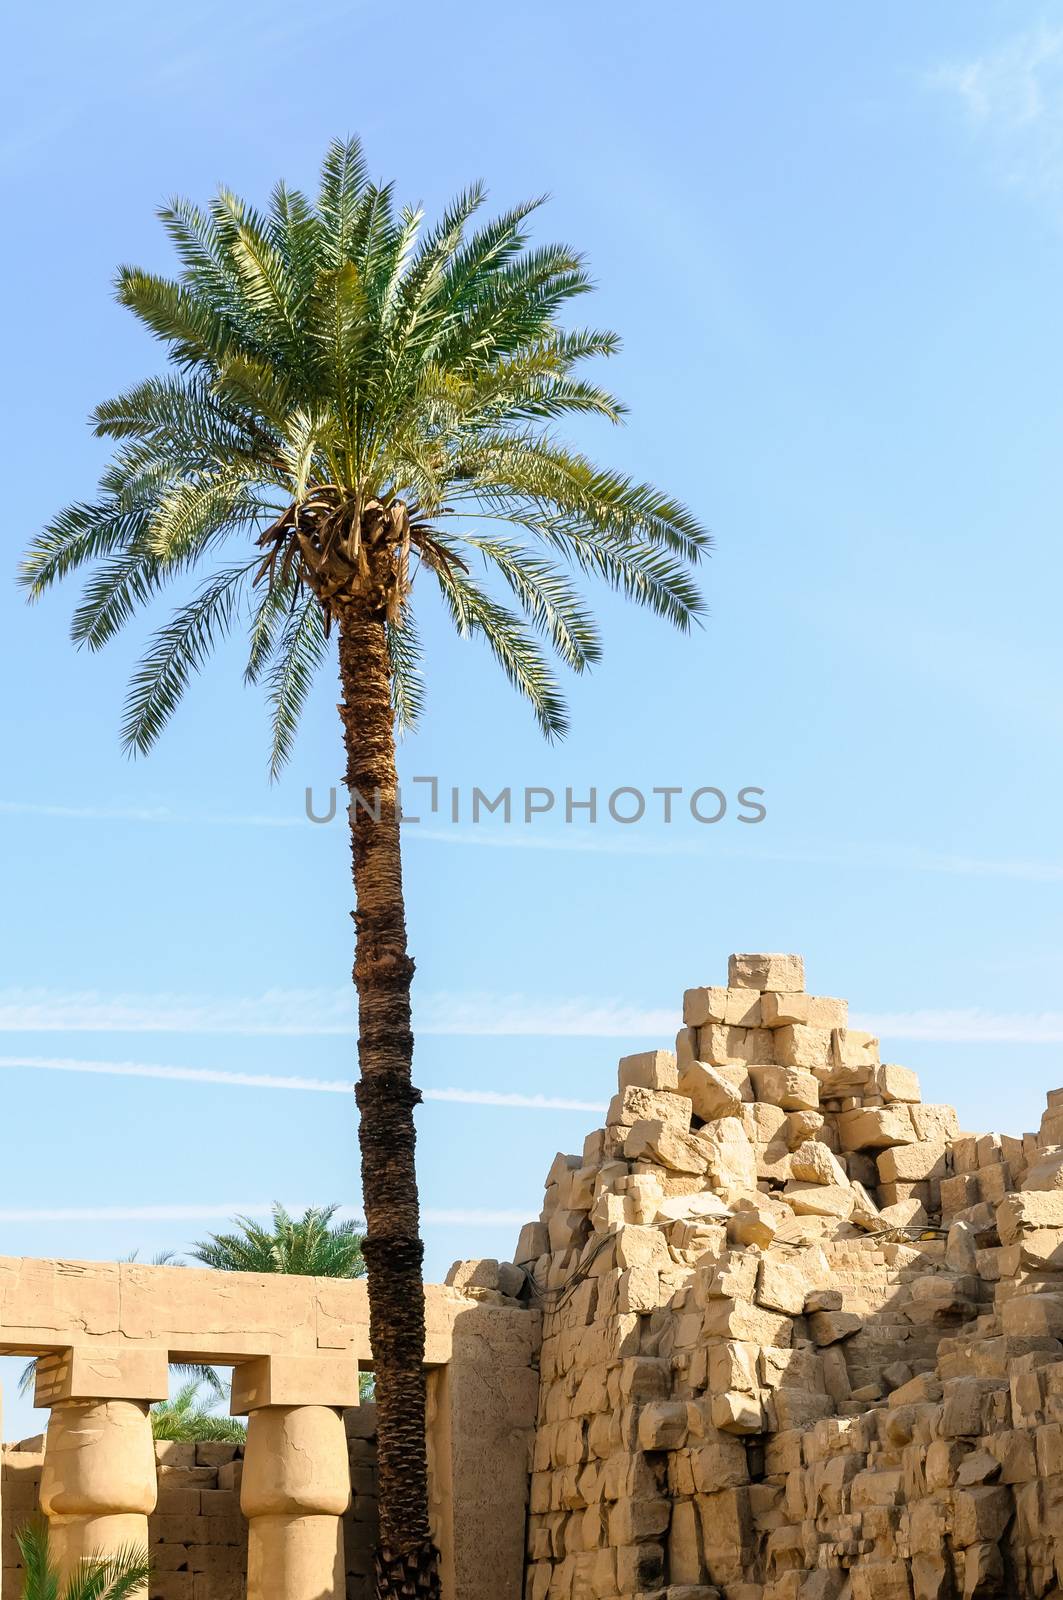 Palm and ruins in the Karnak temple in Luxor, Egypt